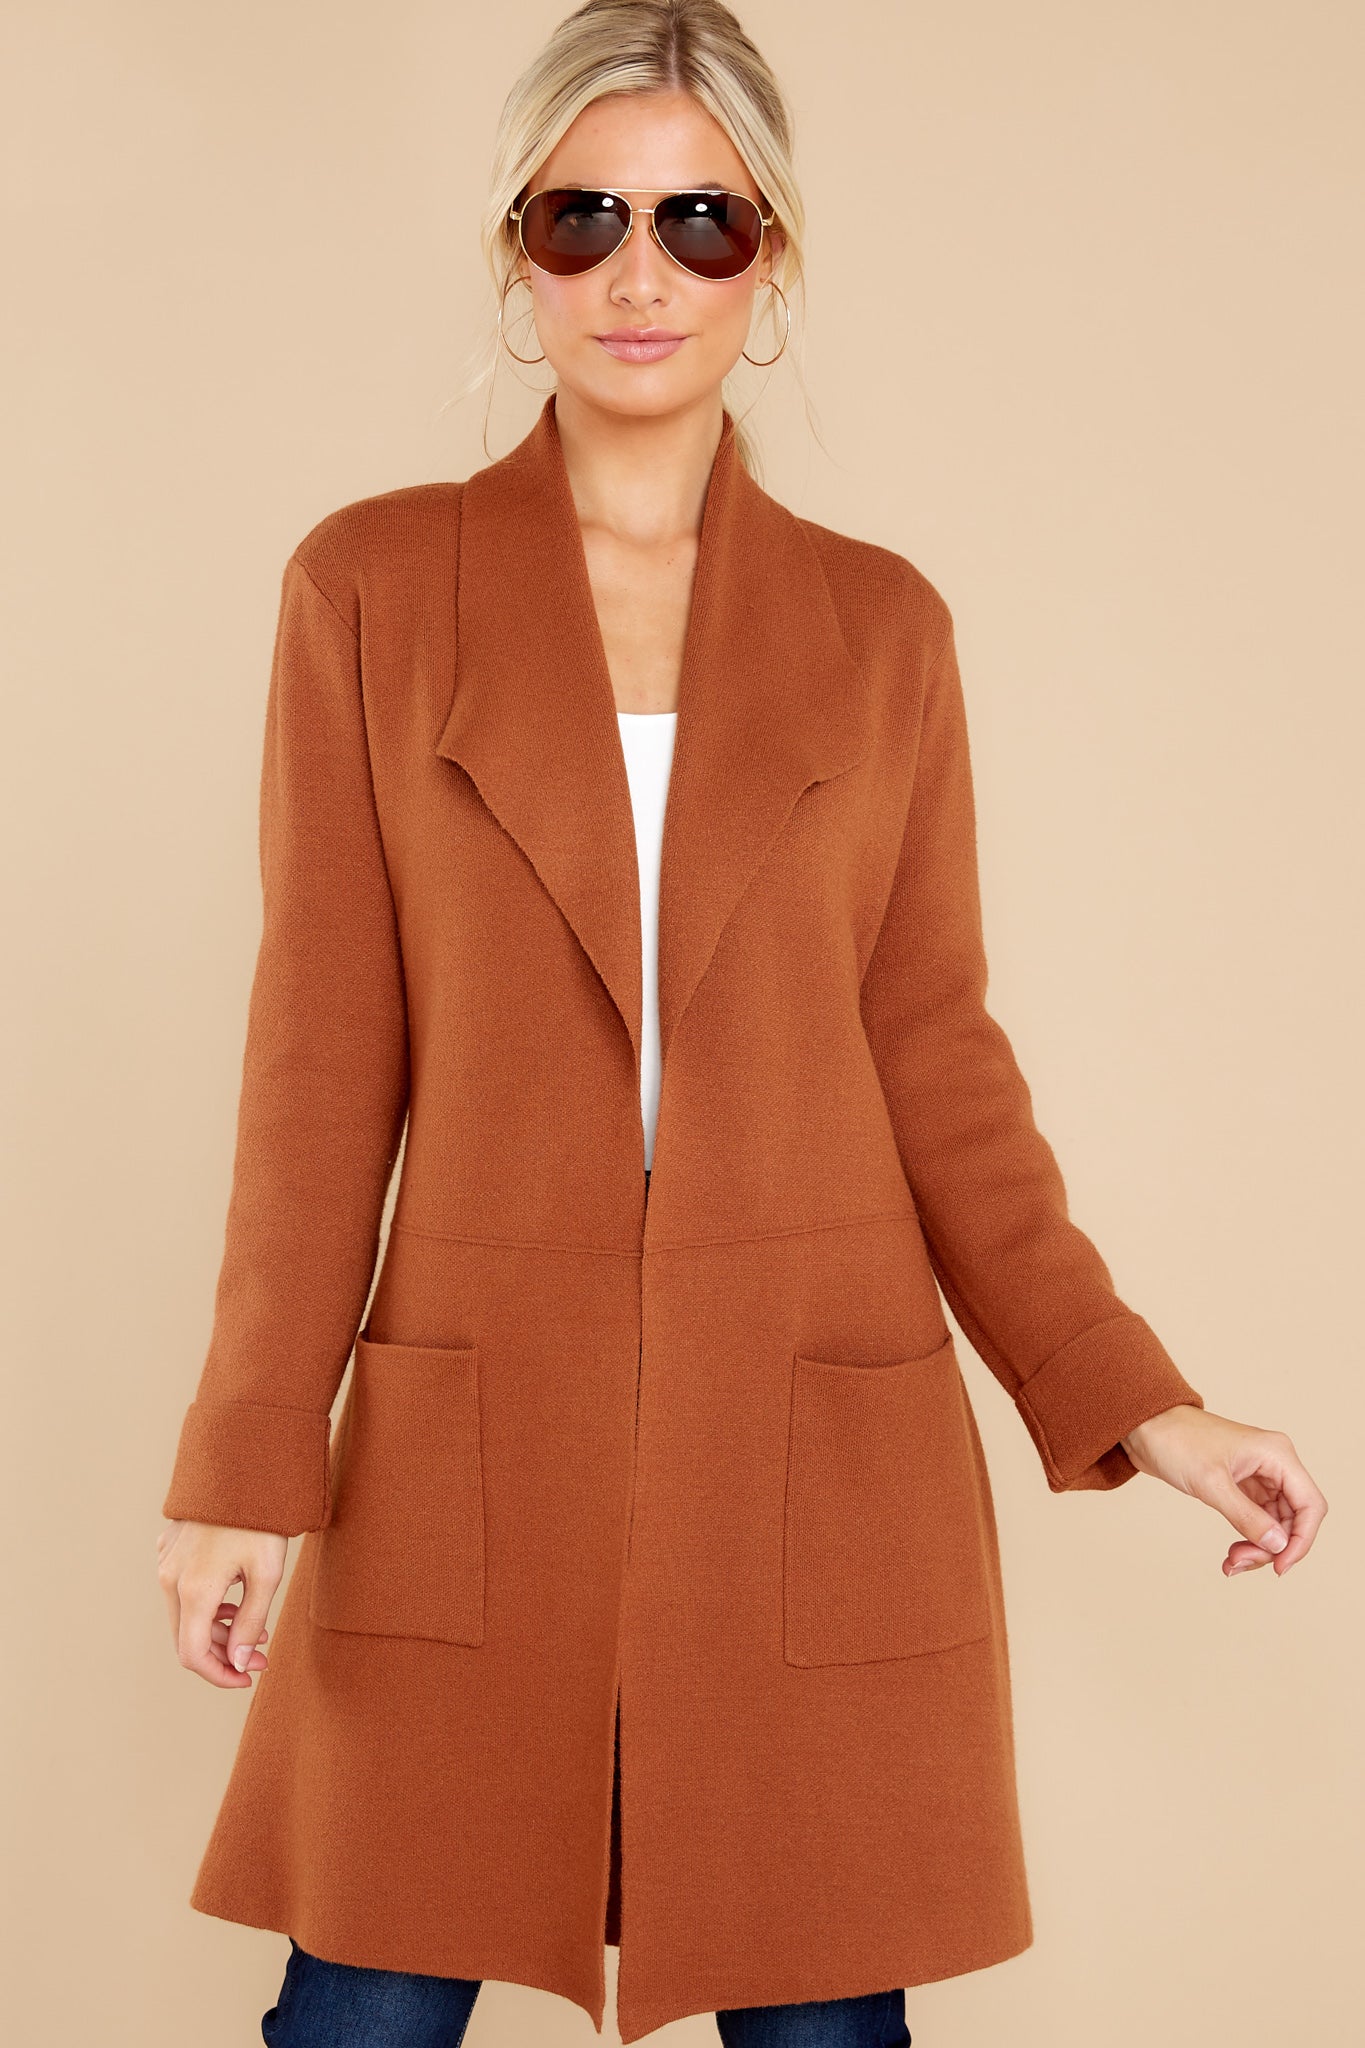 Chilled Beauty Chestnut Cardigan - Red Dress